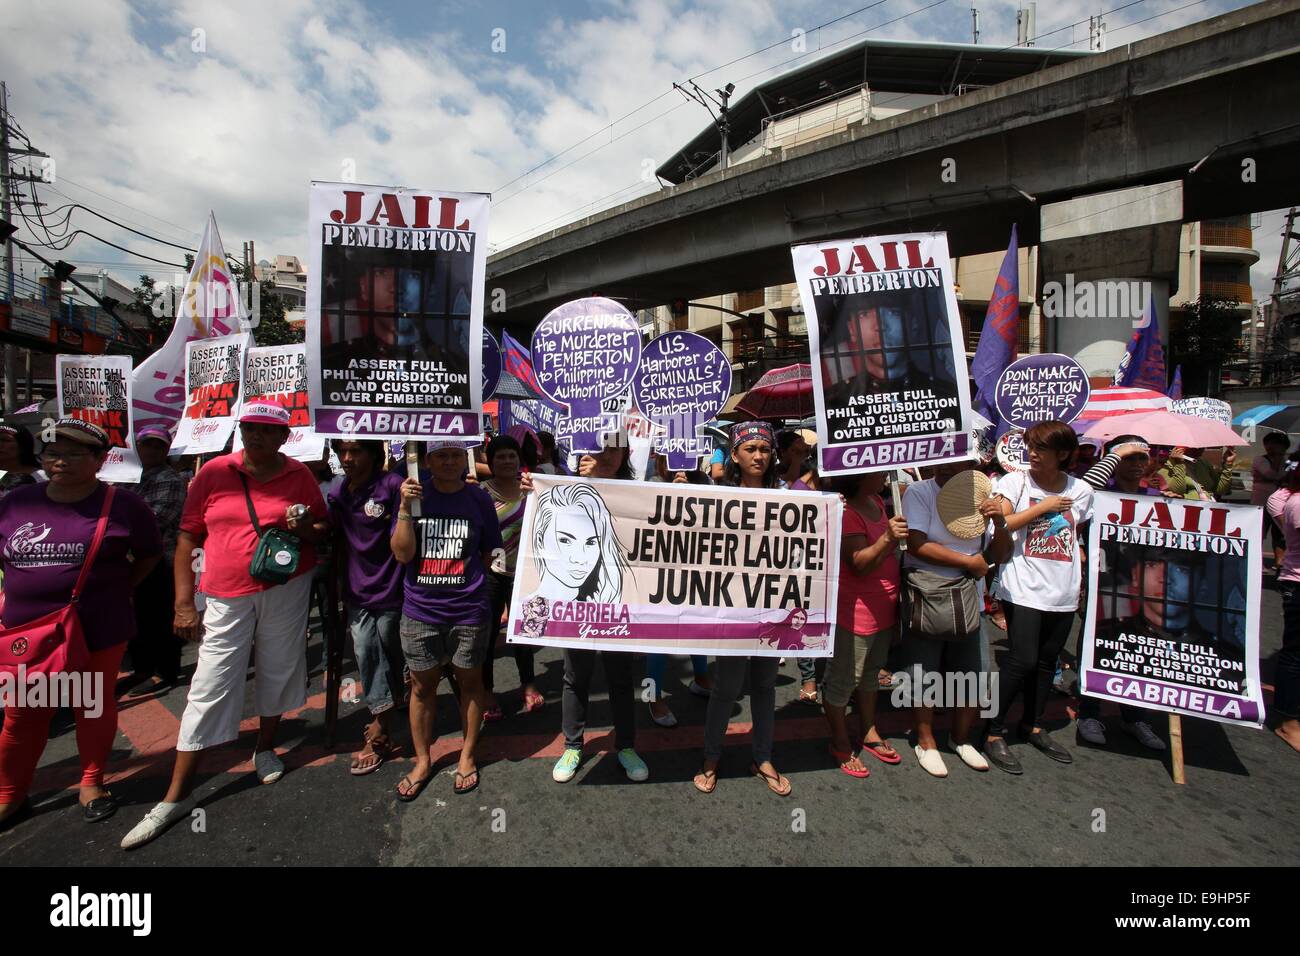 Manila, Philippines. 28th Oct, 2014. Activists hold placards during a protest rally near the Malacanan Palace in Manila, Philippines, on Oct. 28, 2014. The protesters called for the junking of the Enhanced Defense Cooperation Agreement (EDCA) and demanded justice for Filipino transgender Jeffrey 'Jennifer' Laude who was allegedly killed by U.S. Marine Private First Class Joseph Scott Pemberton. Credit:  Rouelle Umali/Xinhua/Alamy Live News Stock Photo